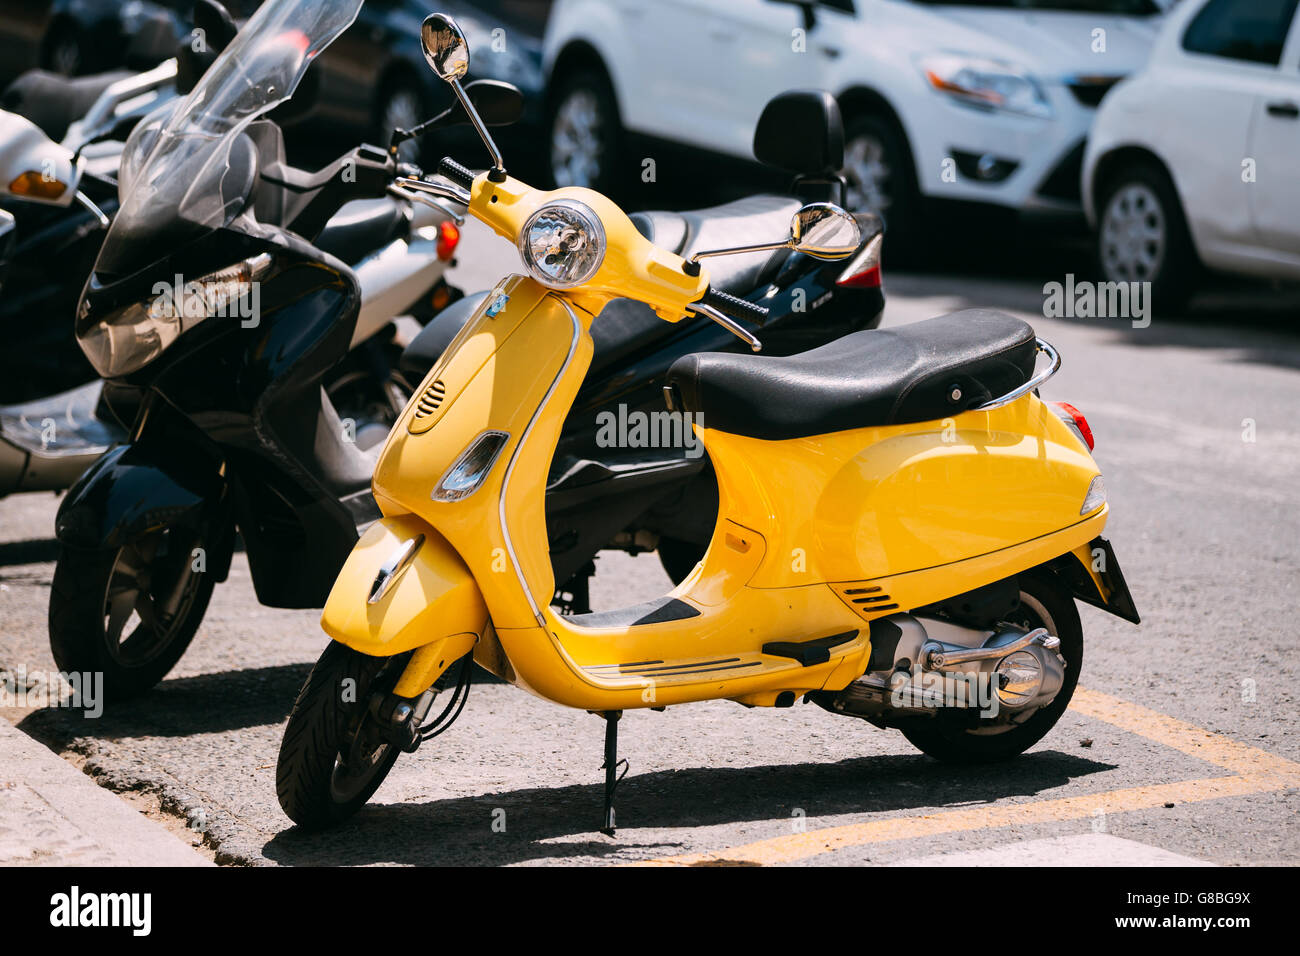 Seville, Spain - June 24, 2015: Yellow Piaggio Vespa vintage sprint motor scooter motorbike motorcycle parked in city. Stock Photo